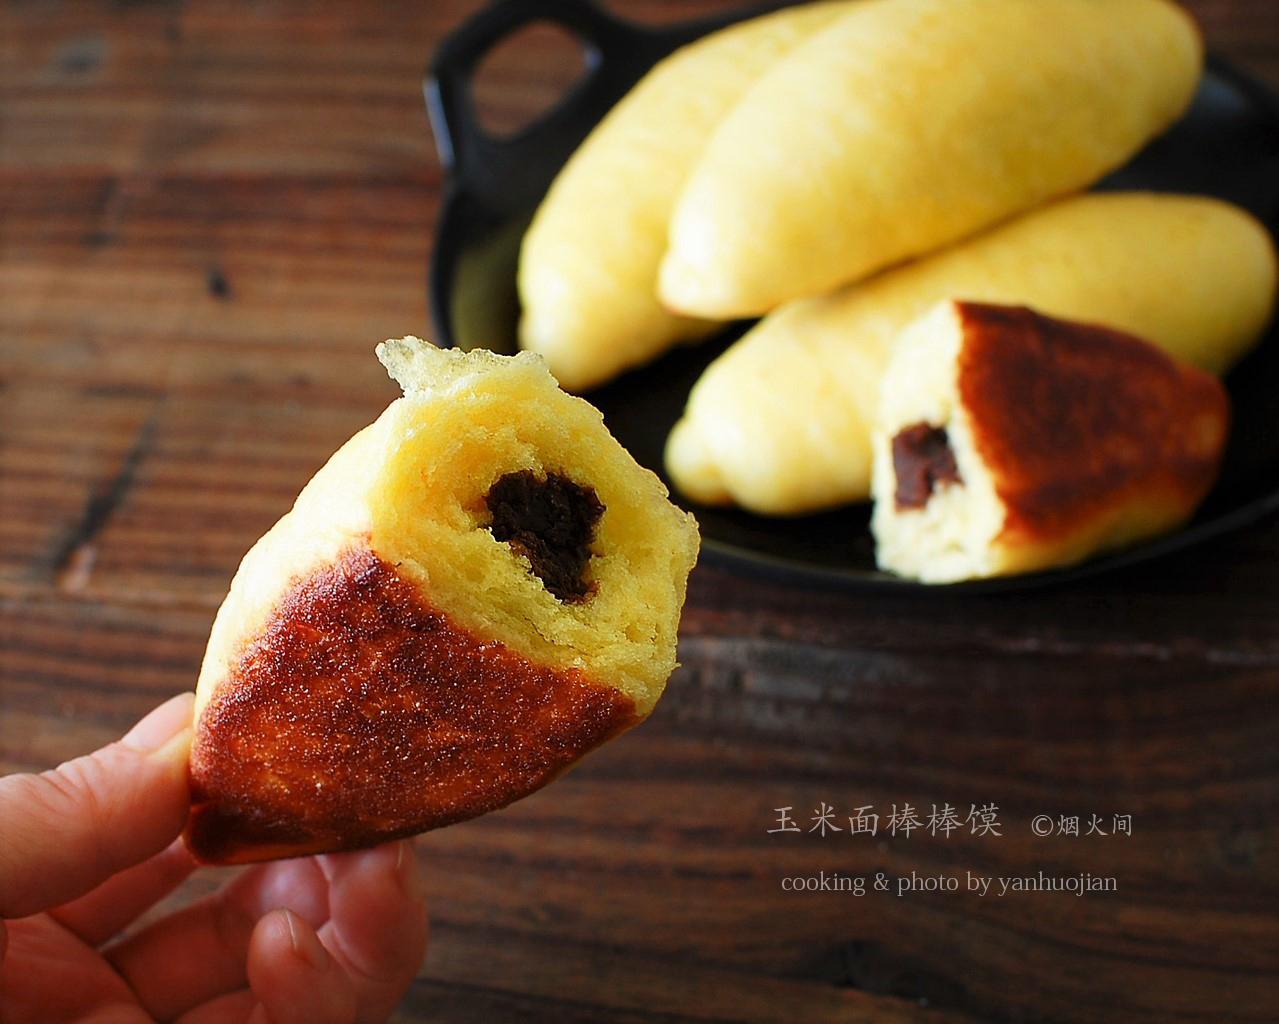 
The practice of good steamed bread of corn face club, how to do delicious